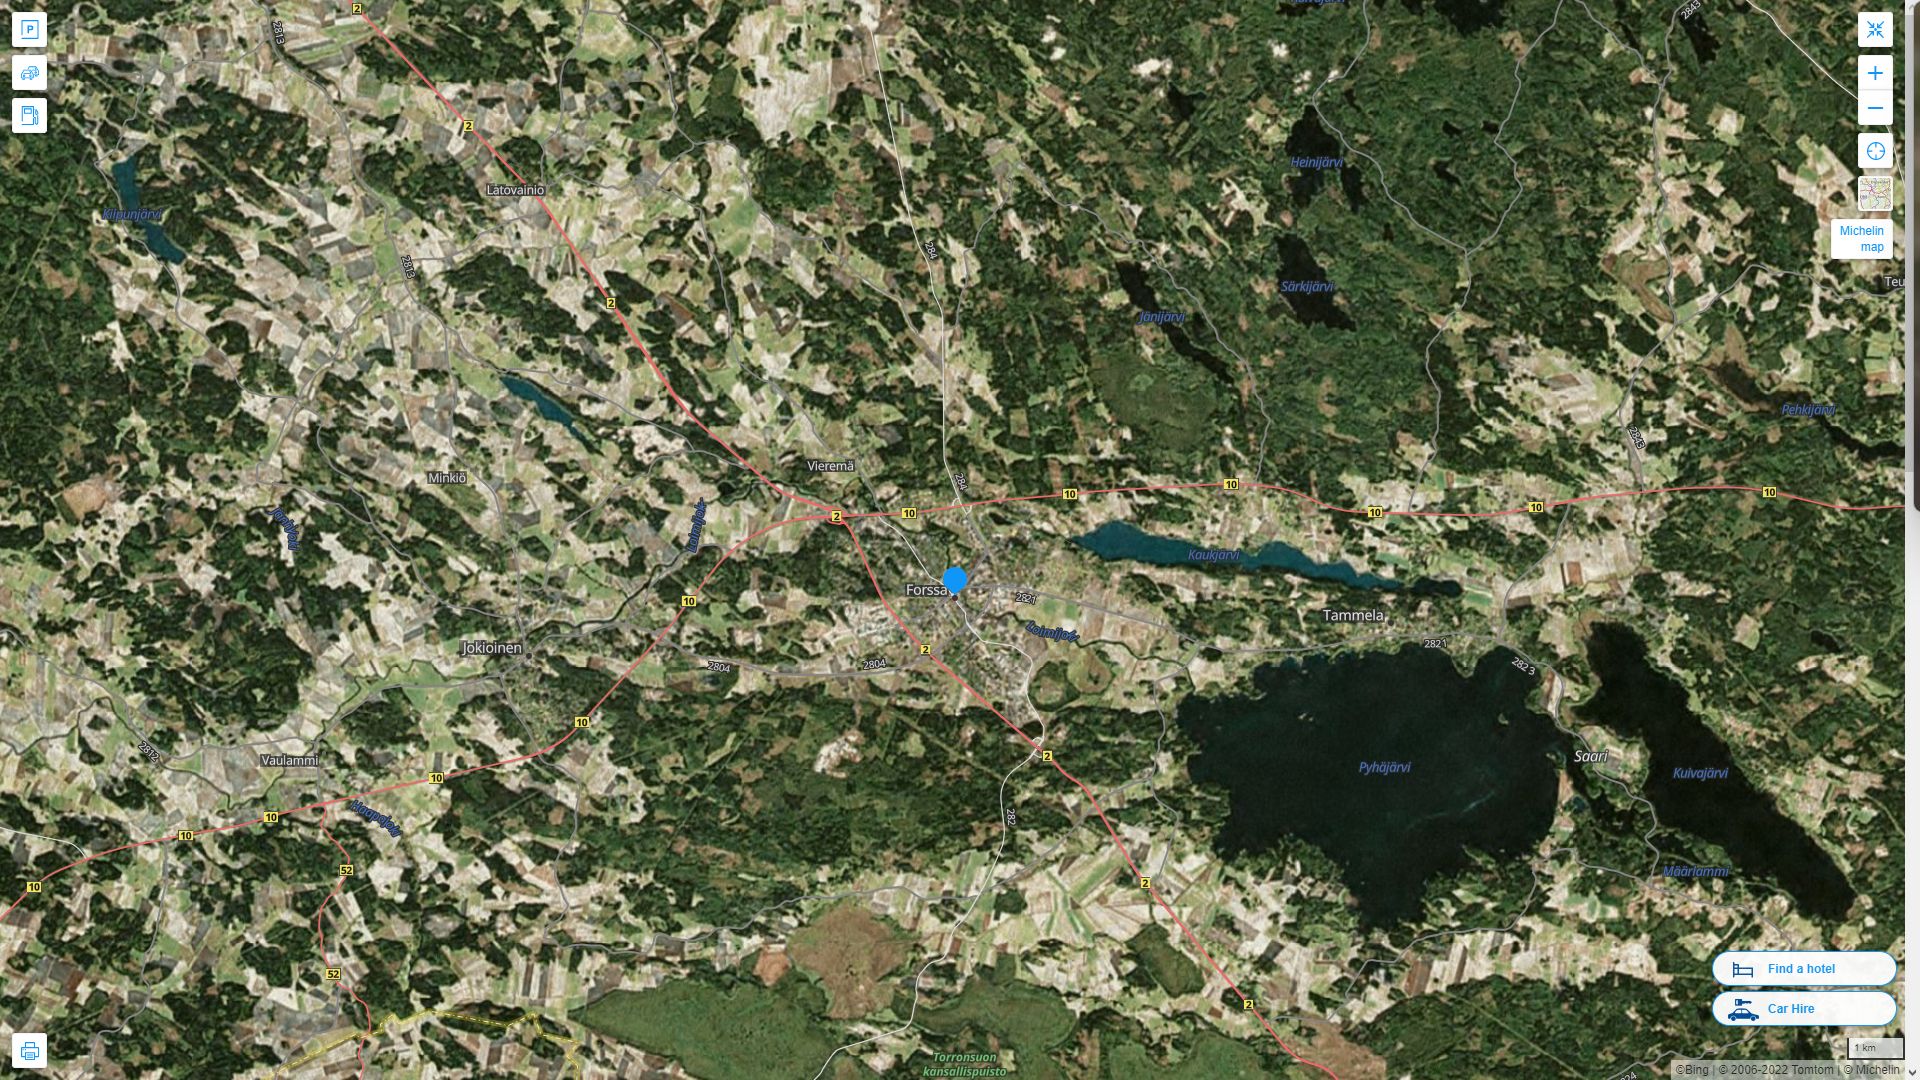 Forssa Highway and Road Map with Satellite View